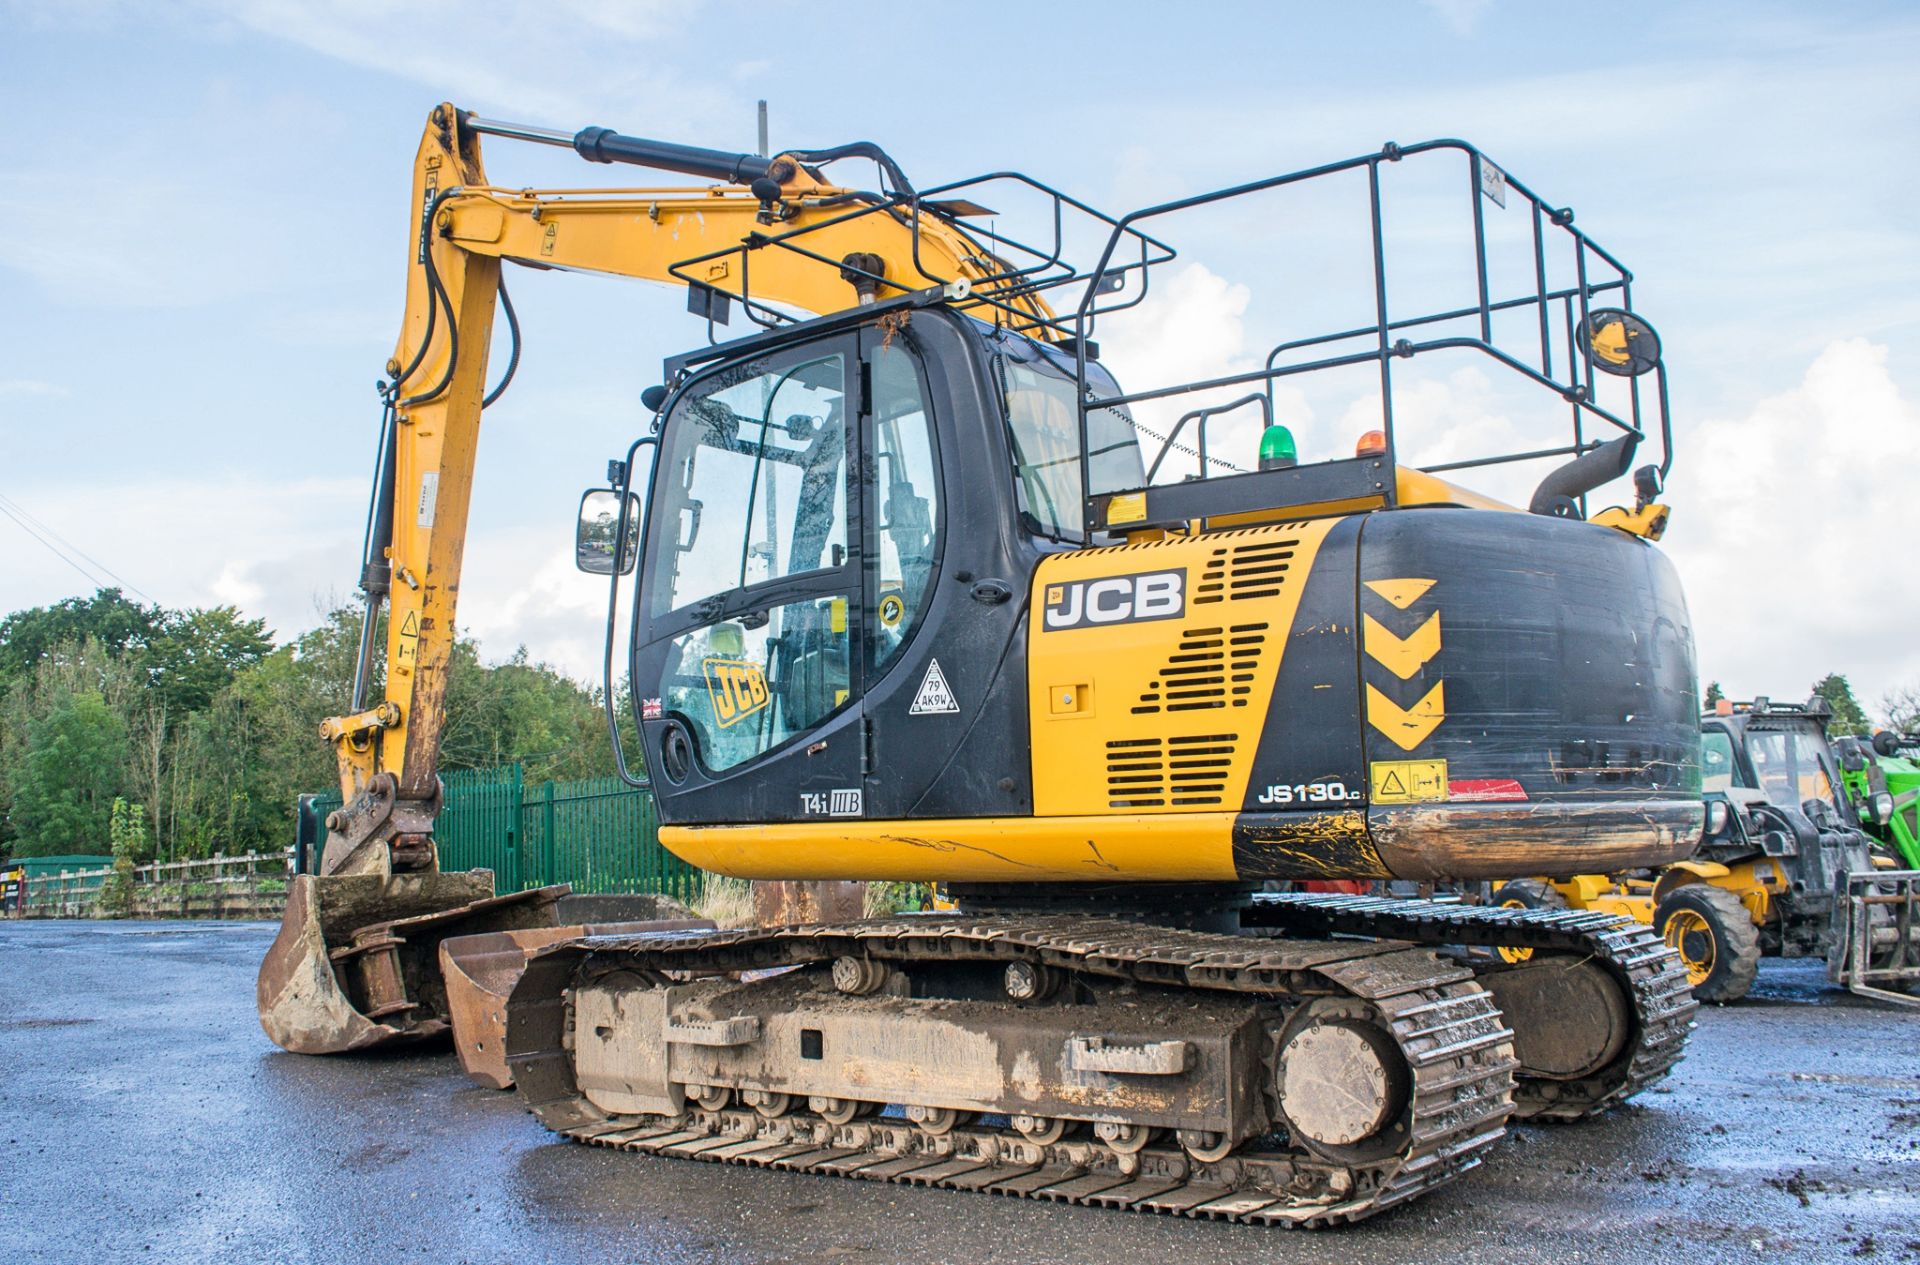 JCB JS130 LC 14 tonne steel tracked excavator Year: 2015 S/N: 2134749 Recorded Hours: 4658 auxillary - Bild 3 aus 22